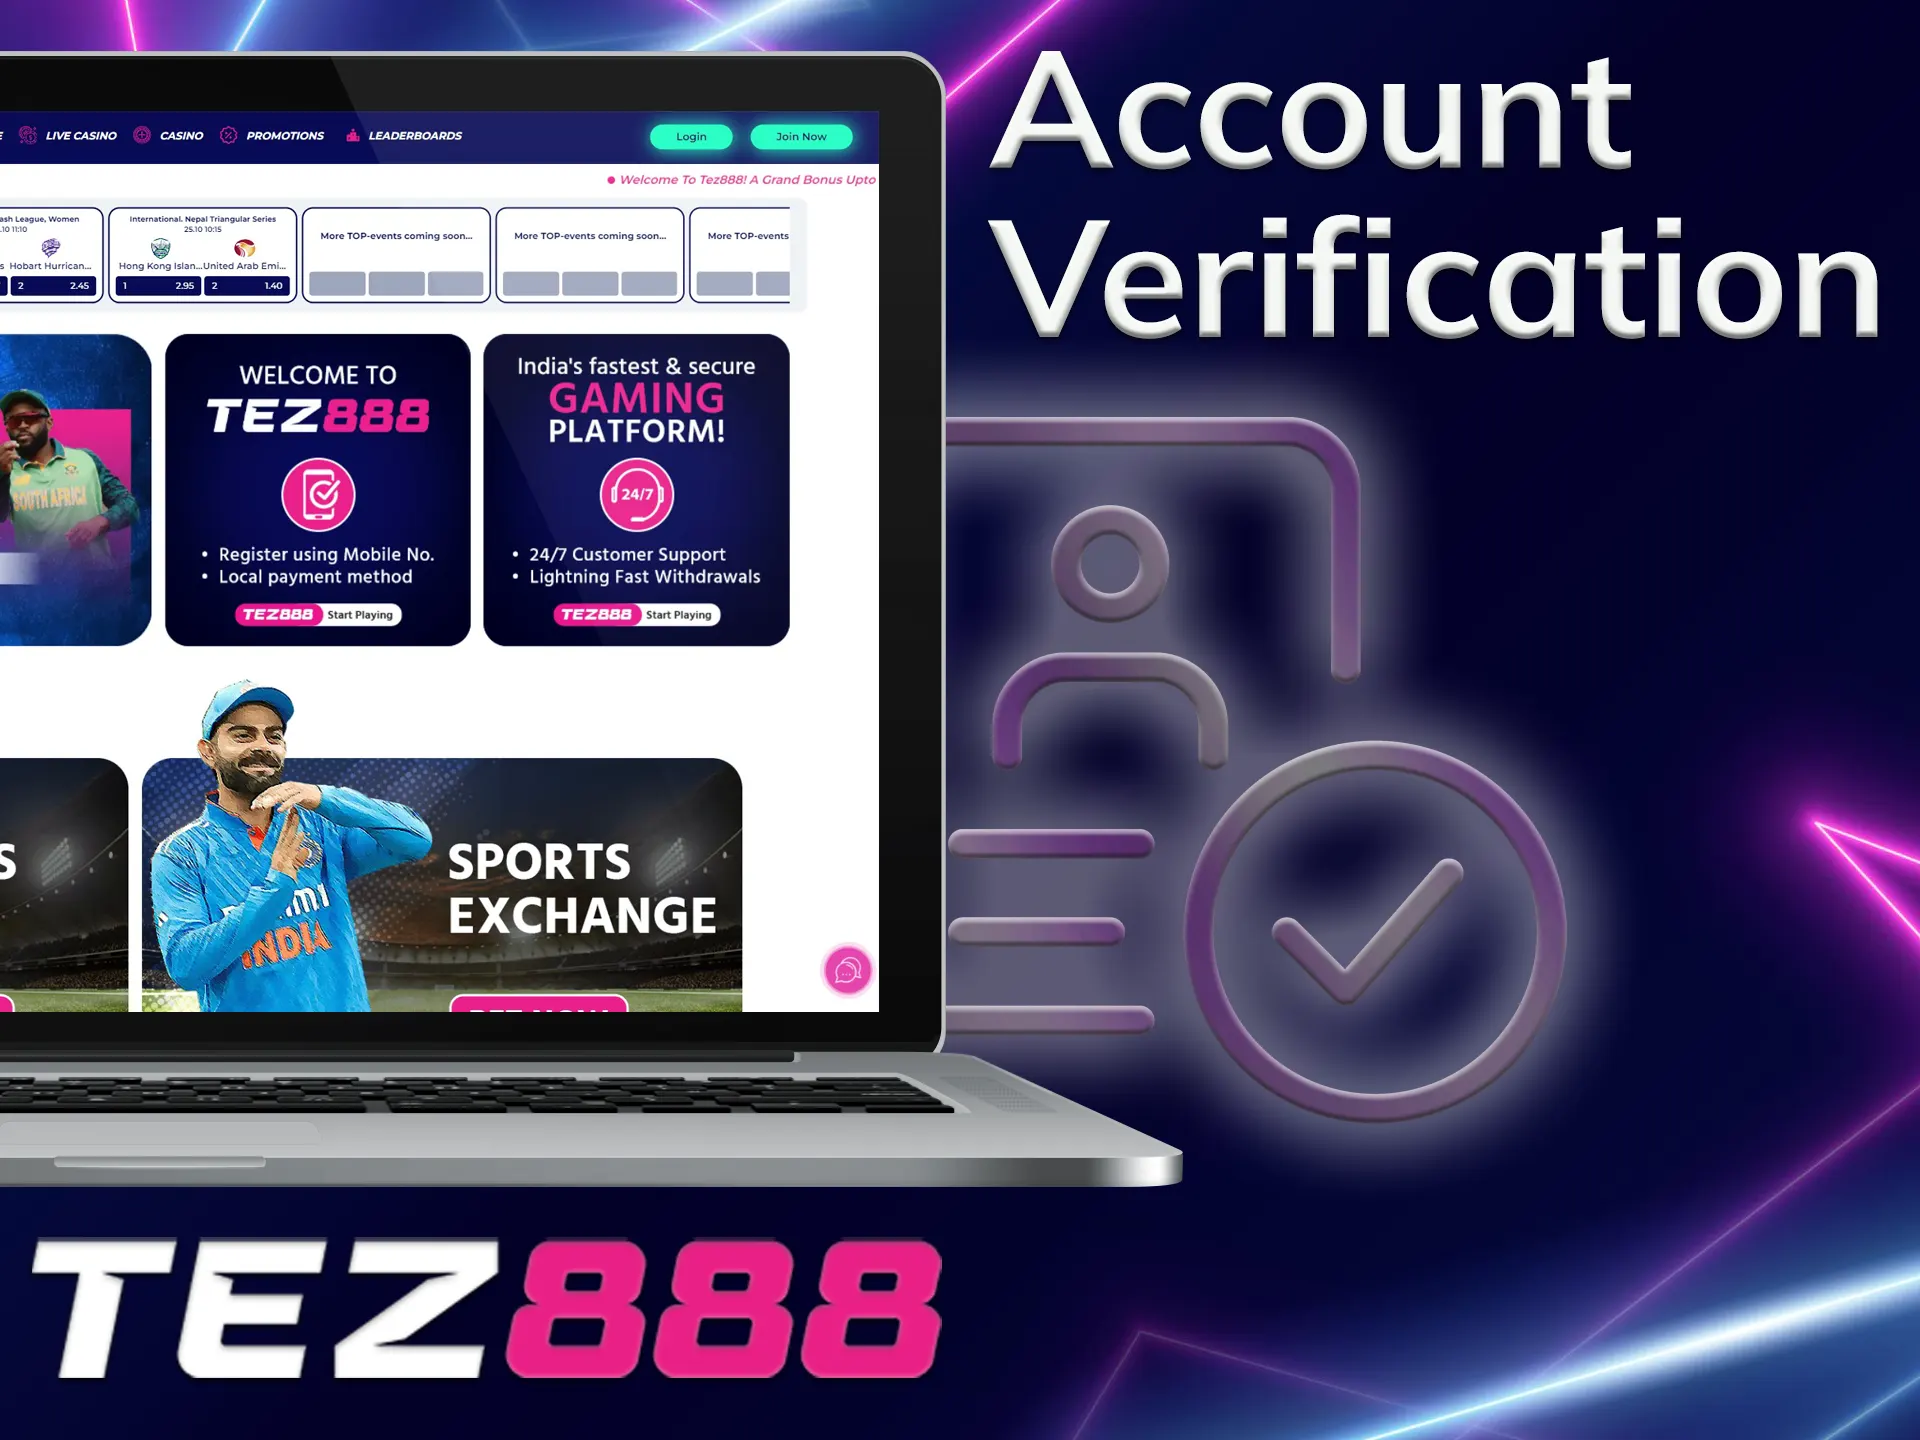 Verify your account at tez888.